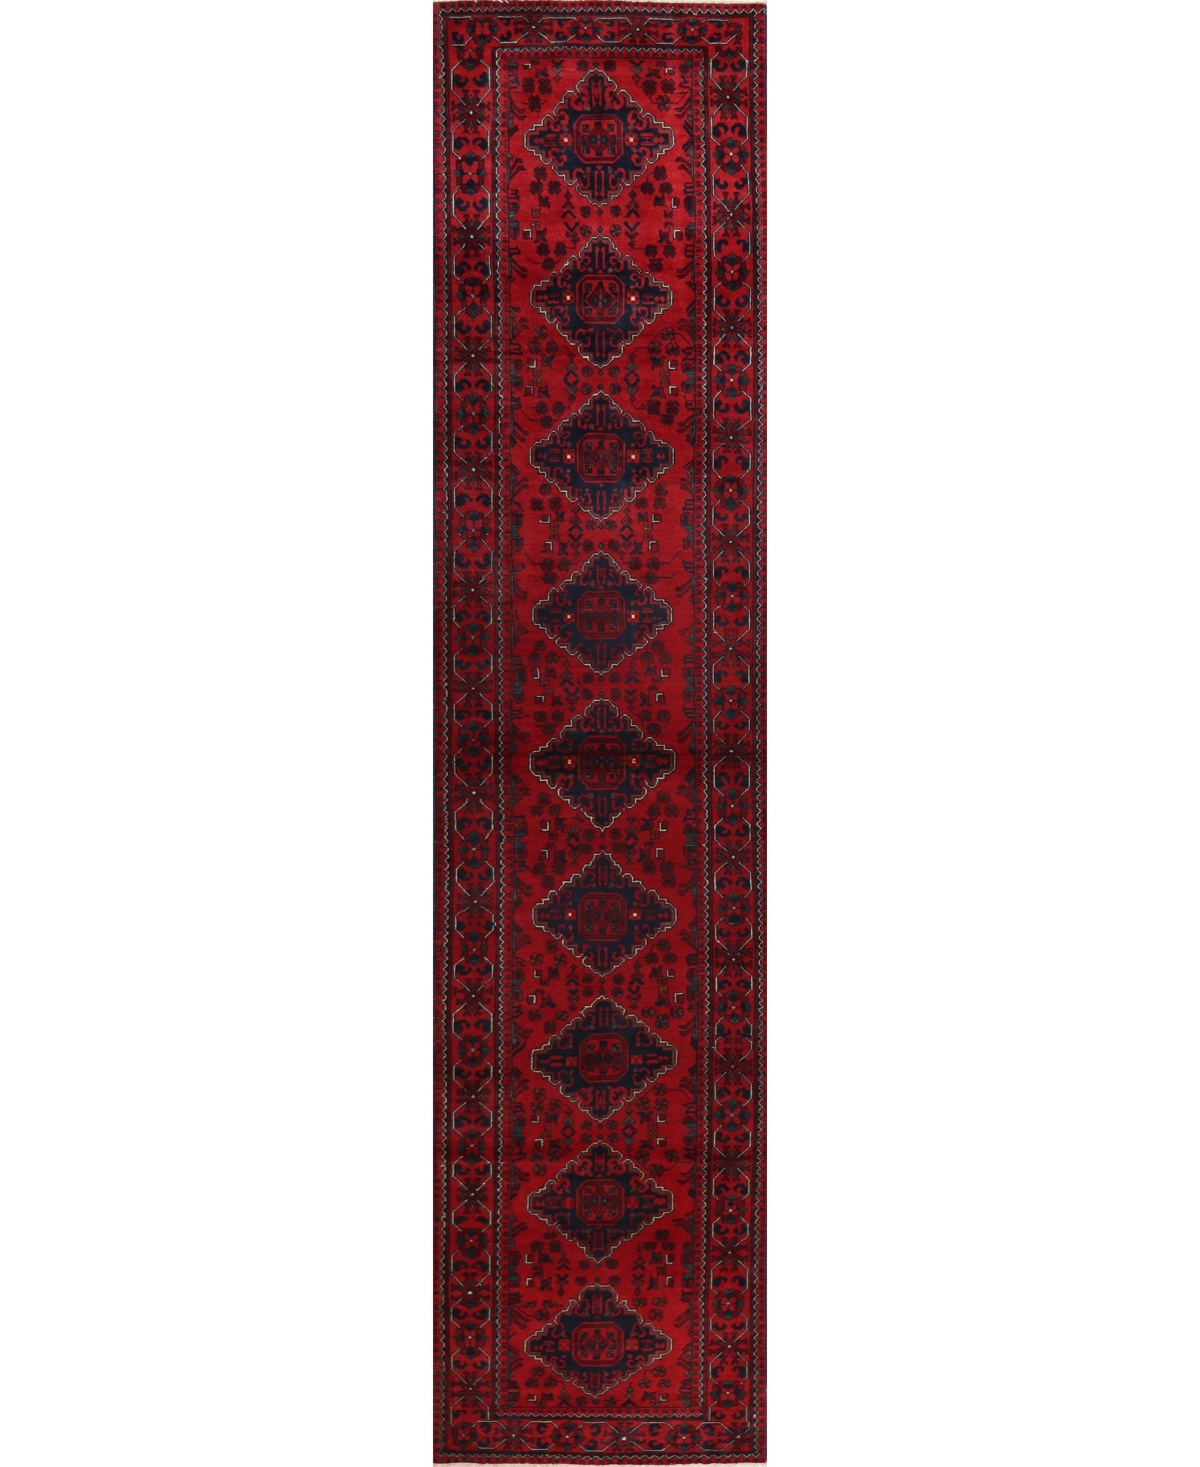 Bb Rugs One Of A Kind Fine Beshir 2'8" X 12'1" Runner Area Rug In Red